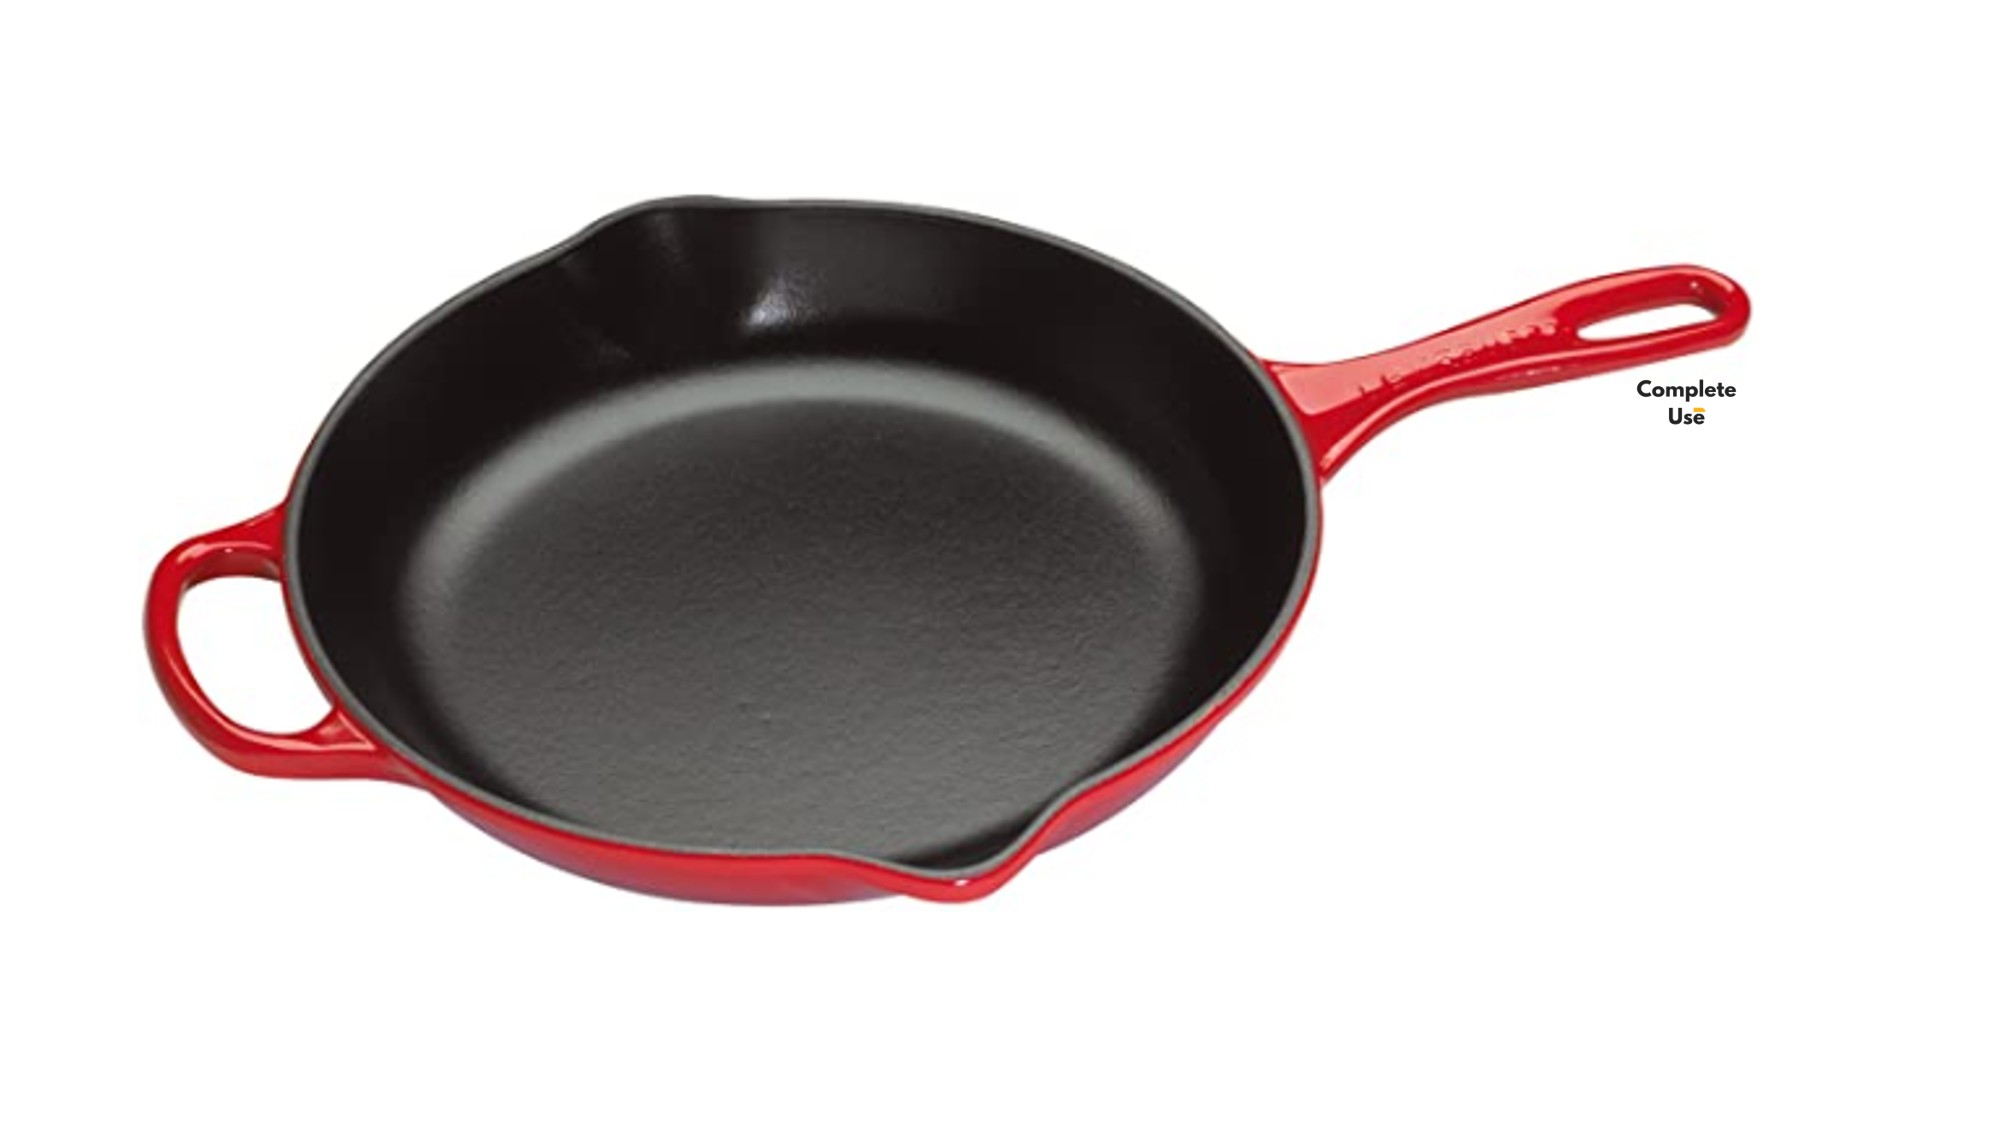 Buy it for Life - Le Creuset 10-¼” Signature Iron Handle Skillet